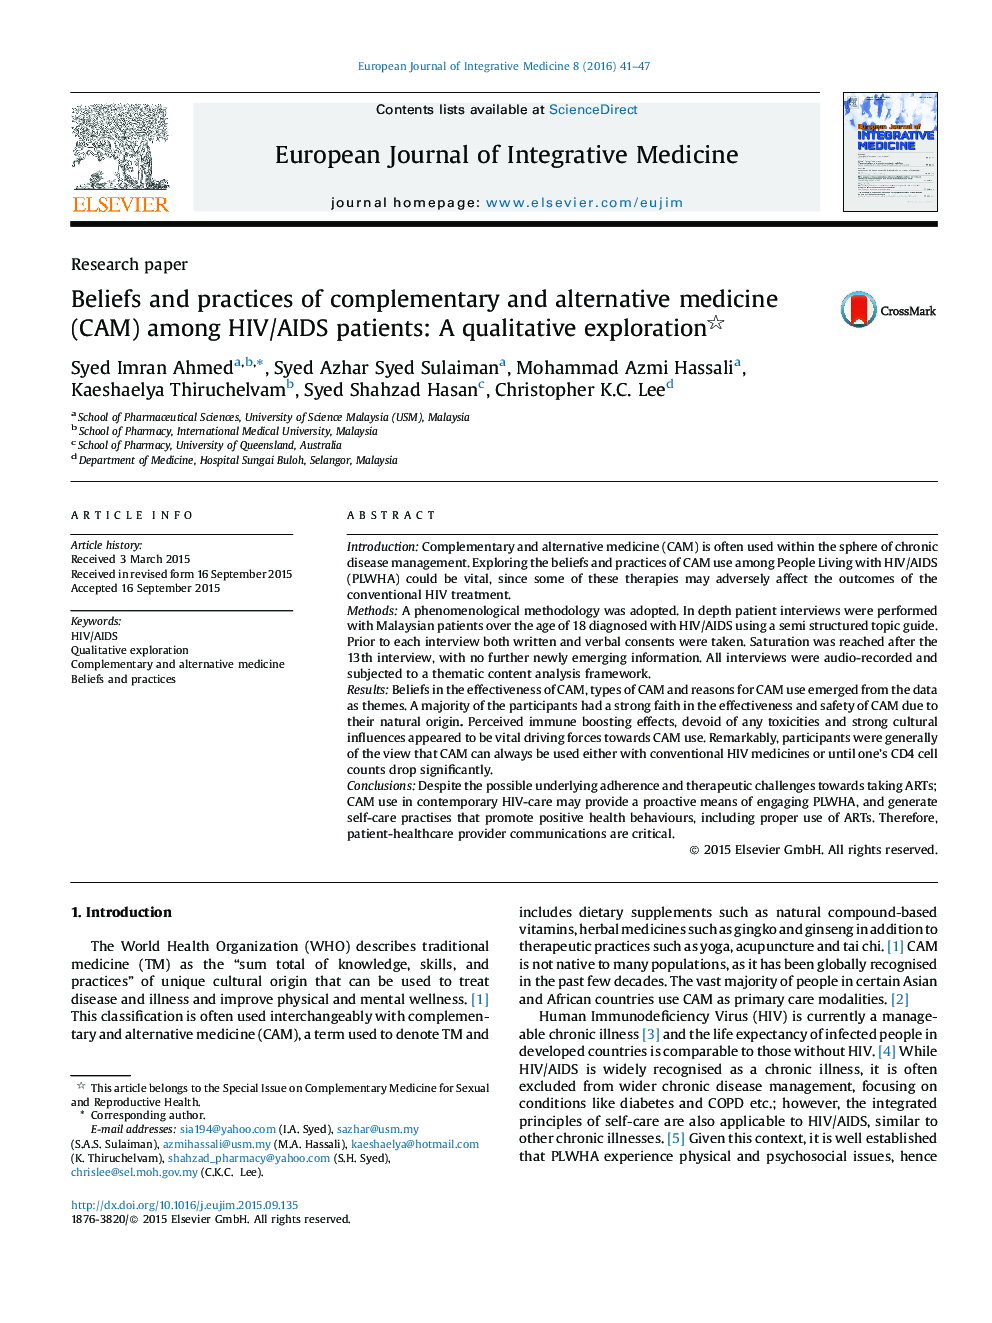 Beliefs and practices of complementary and alternative medicine (CAM) among HIV/AIDS patients: A qualitative exploration